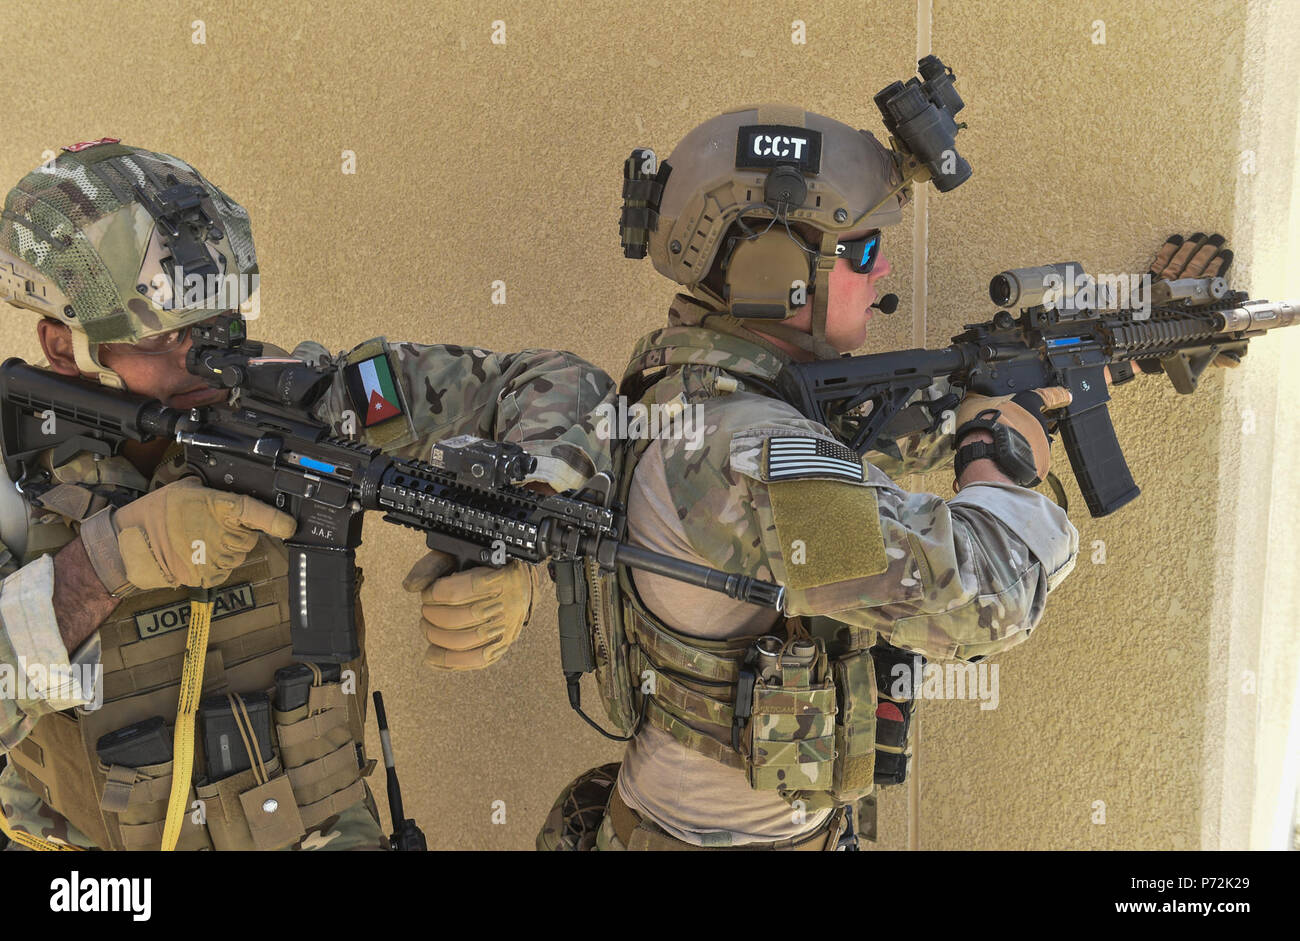 A Jordanian Armed Forces Special Task Force member and an Air Force Special Tactics Airman with the 23rd Special Tactics Squadron, prepare to assault opposing forces during a personnel rescue mission, May 11, 2017, at the King Abdullah II Special Operations Training Center. Eager Lion is an annual U.S. Central Command exercise in Jordan designed to strengthen military-to-military relationships between the U.S., Jordan and other international partners. This year's iteration is comprised of about 7,200 military personnel from more than 20 nations that will respond to scenarios involving border s Stock Photo